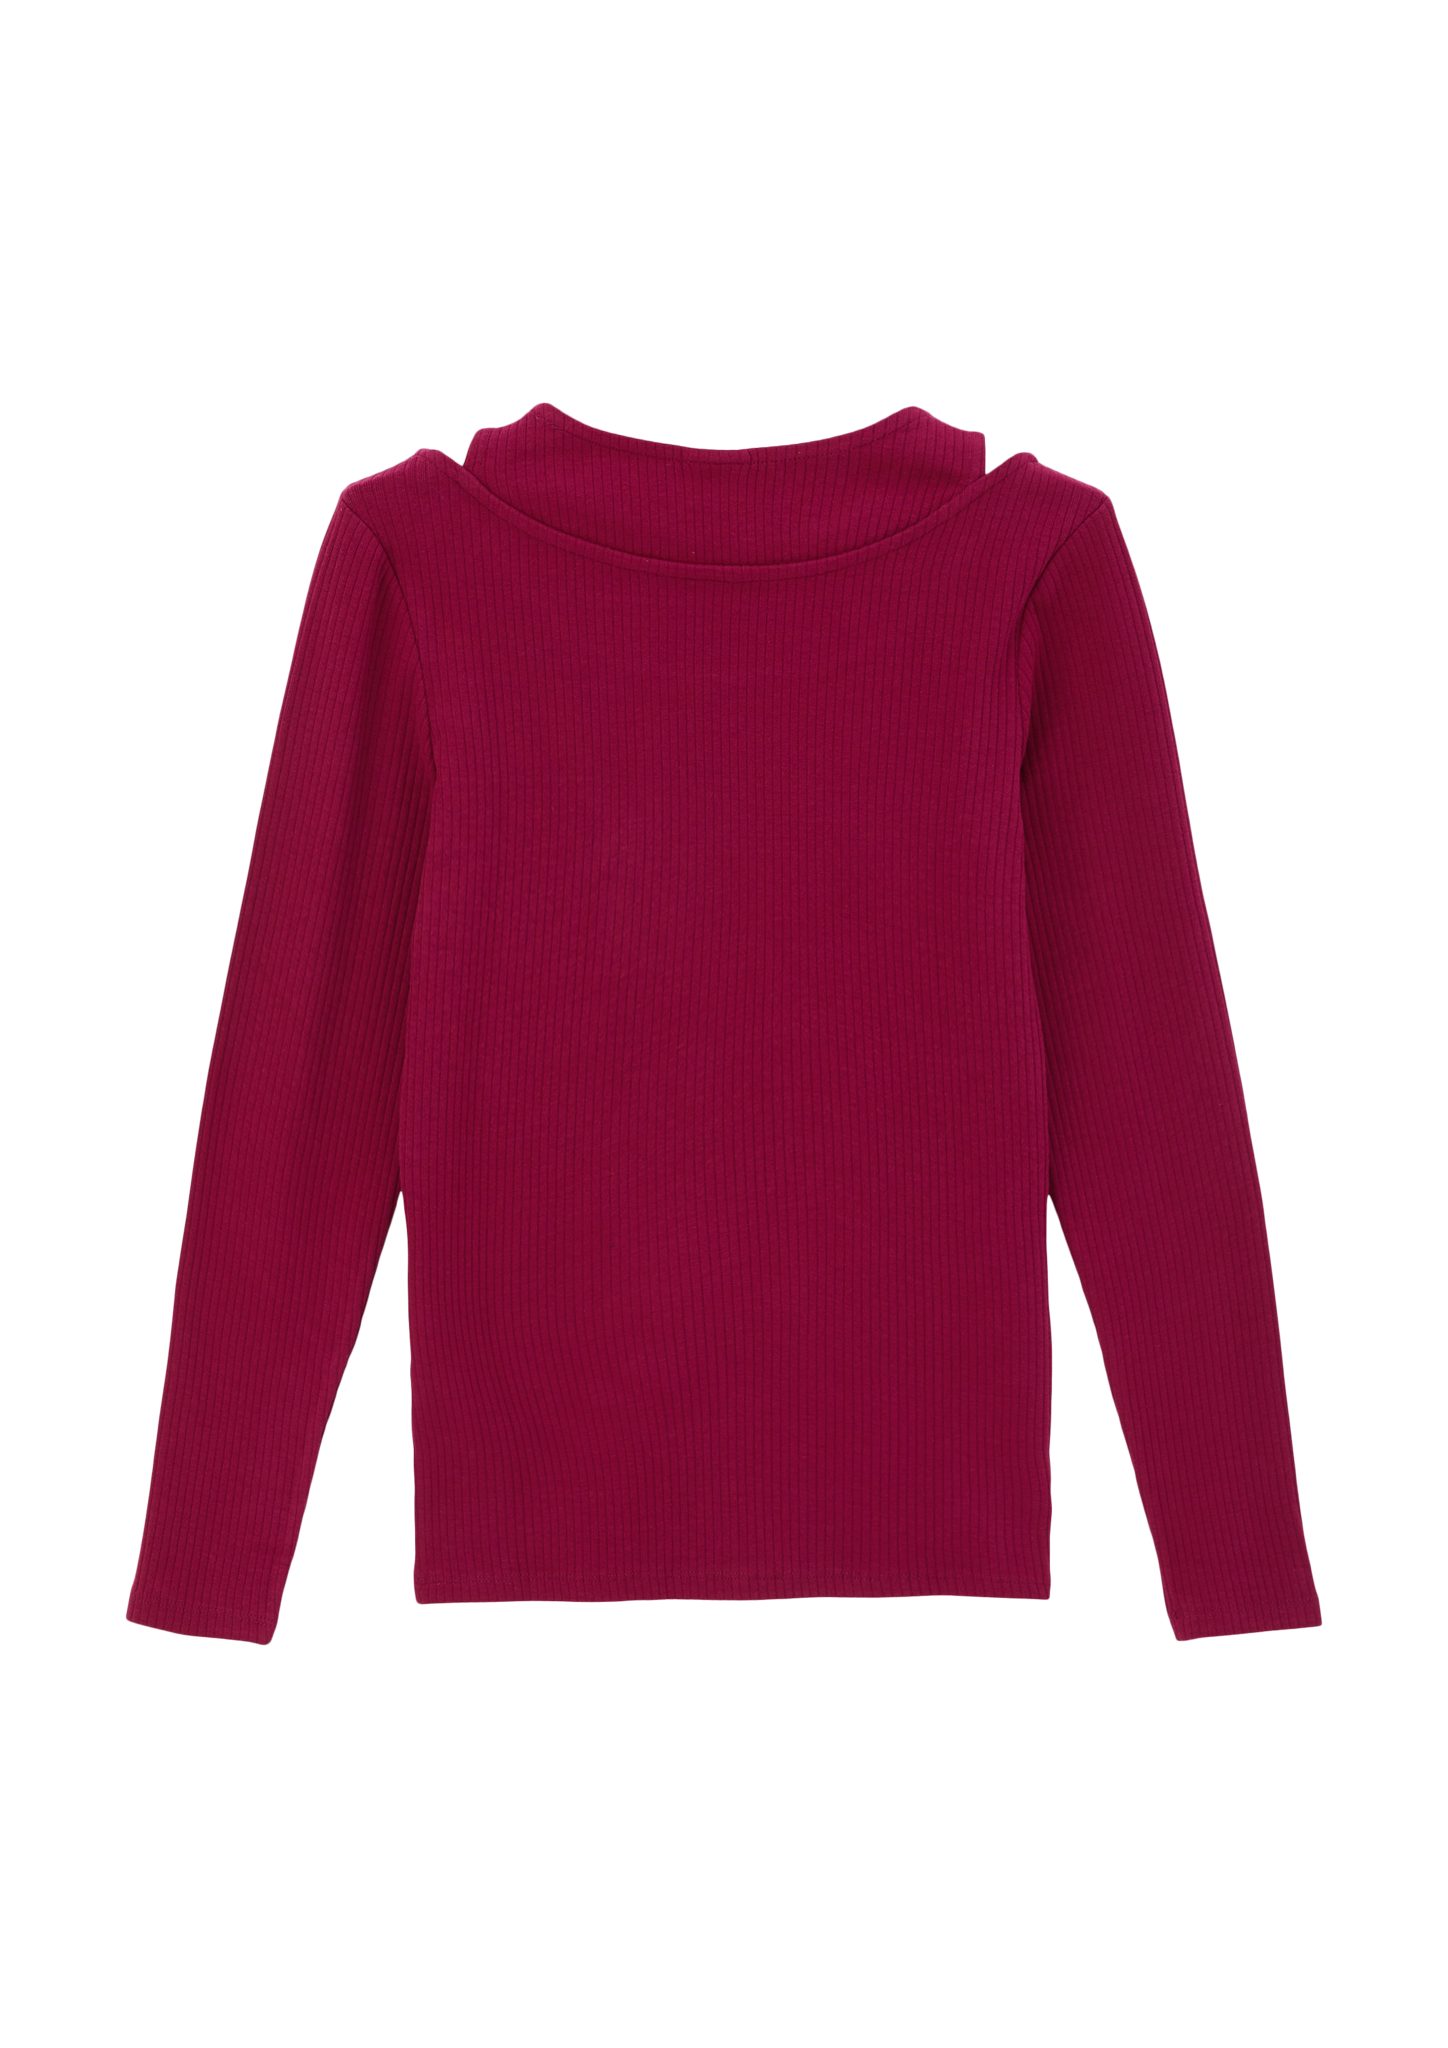 2-in1-Optik Out, Cut Longsleeve Langarmshirt fuchsia mit s.Oliver Teilungsnähte Geripptes